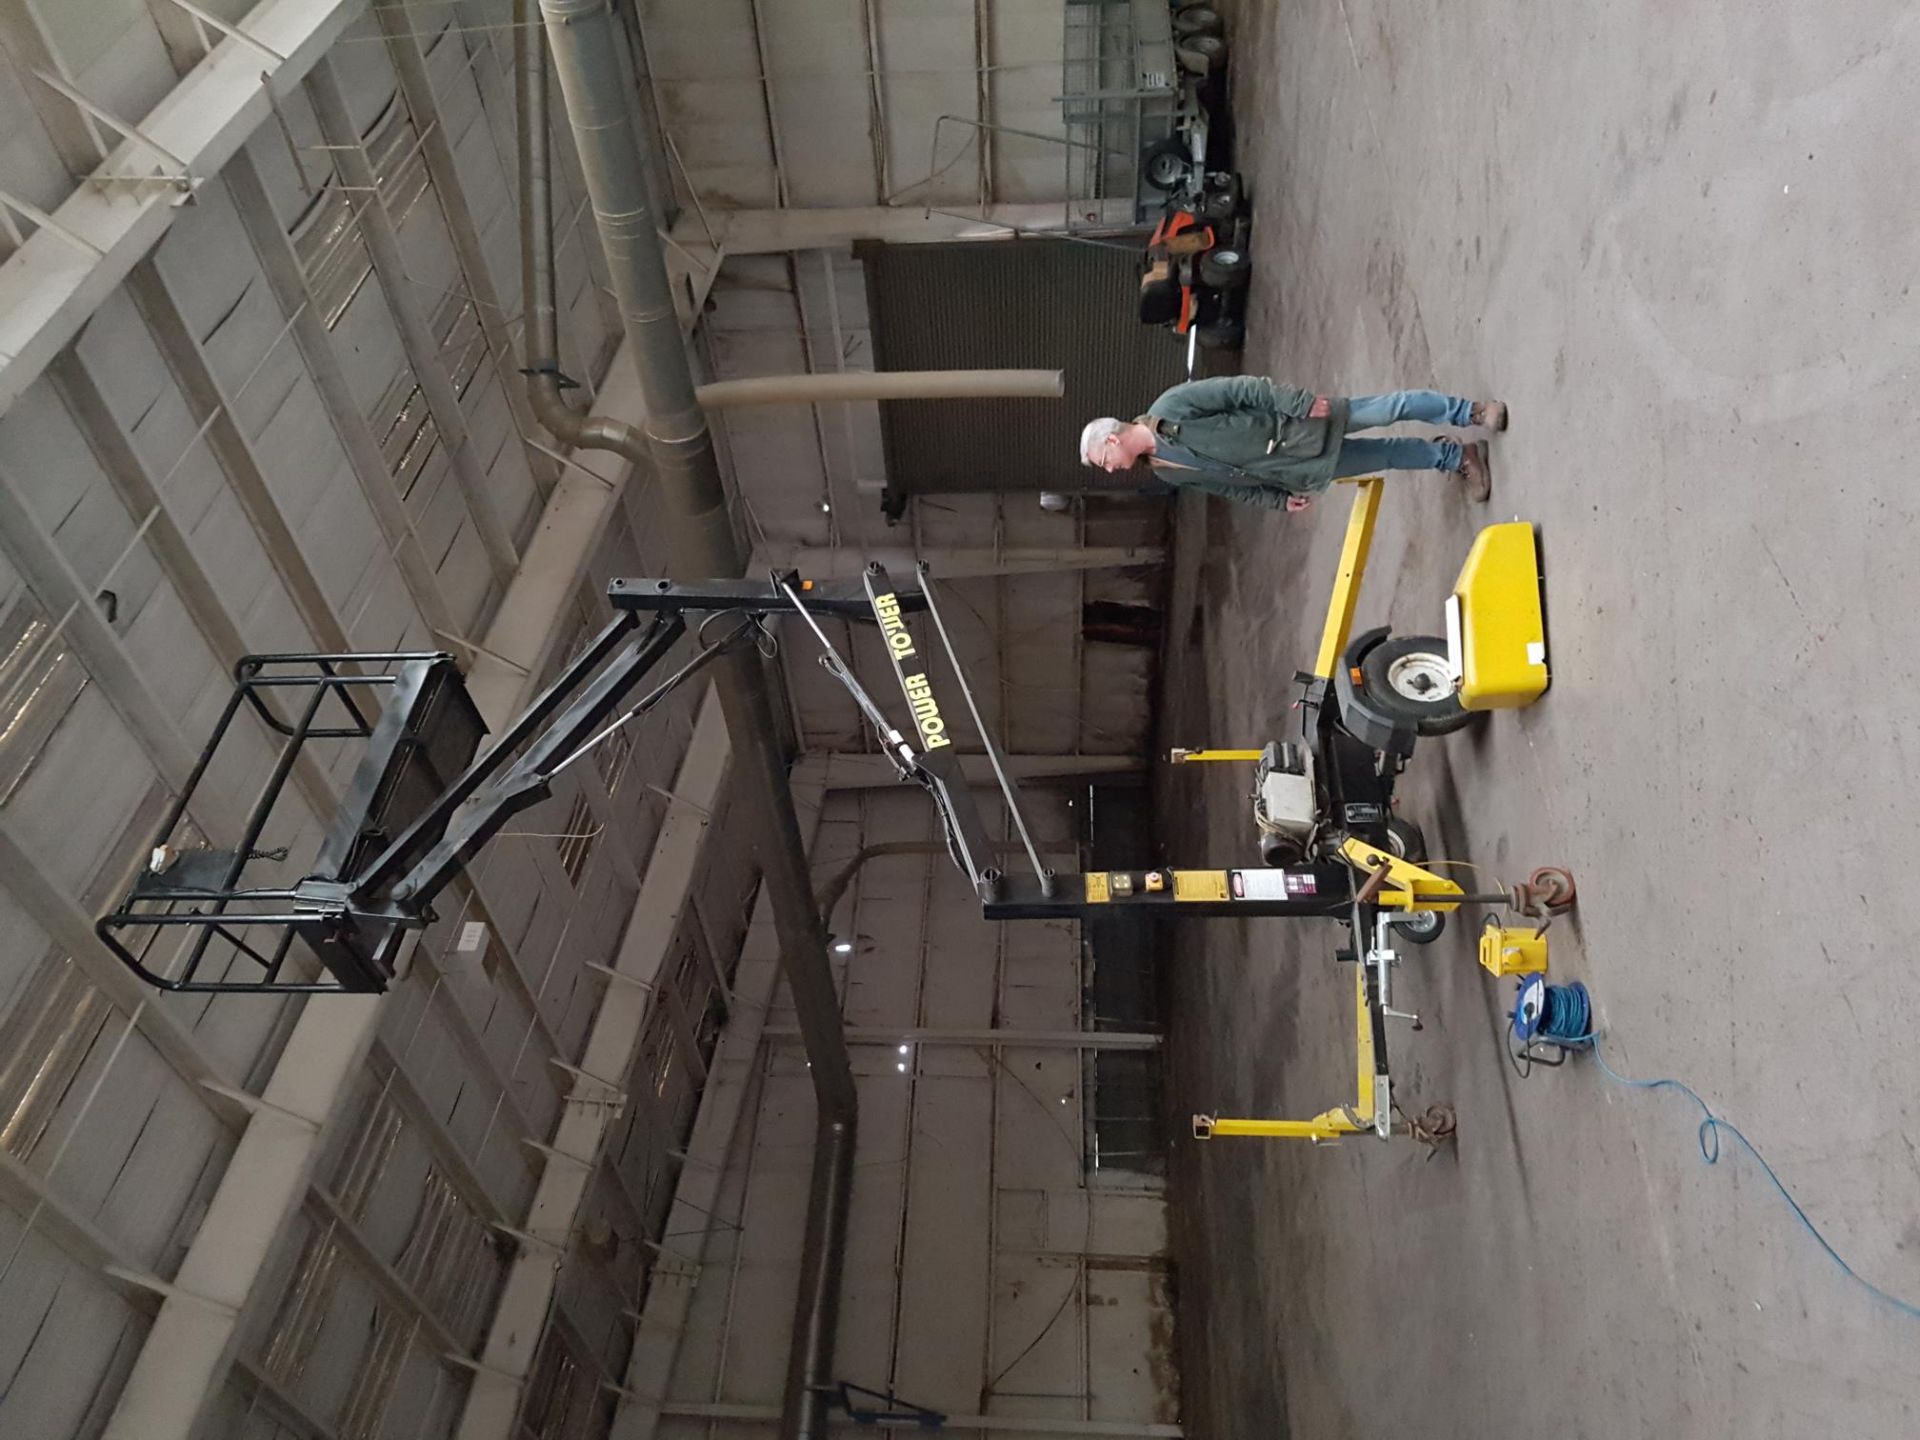 * Power Tower 110V Electric Boom Lift 1996 Class A1 Power Tower 110V Electric Boom Lift. S/N 0118, - Image 8 of 9